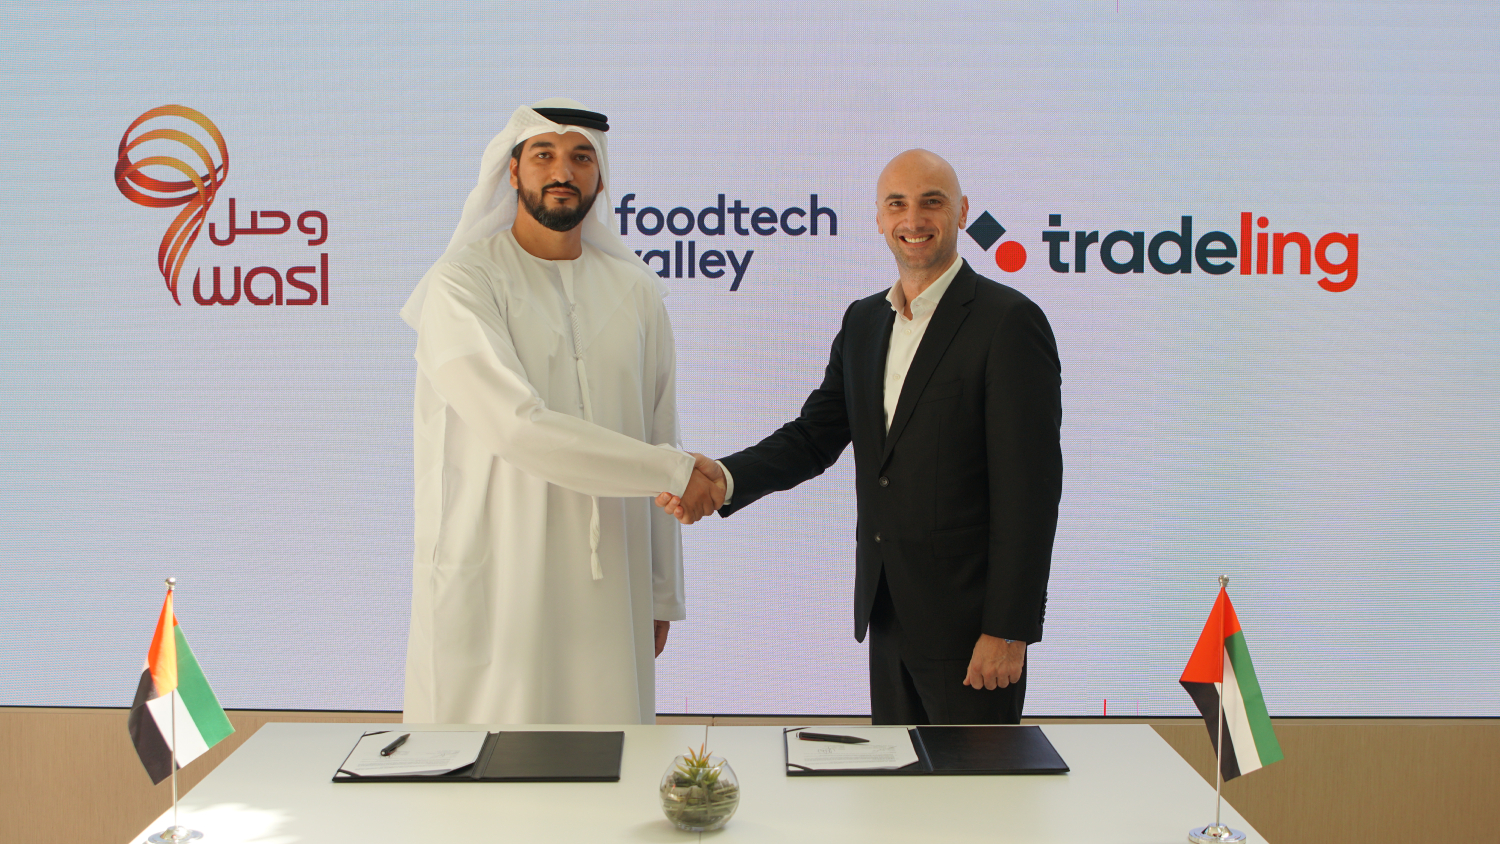 Food Tech Valley Partners with Tradeling to bolster UAE’s food ecosystem